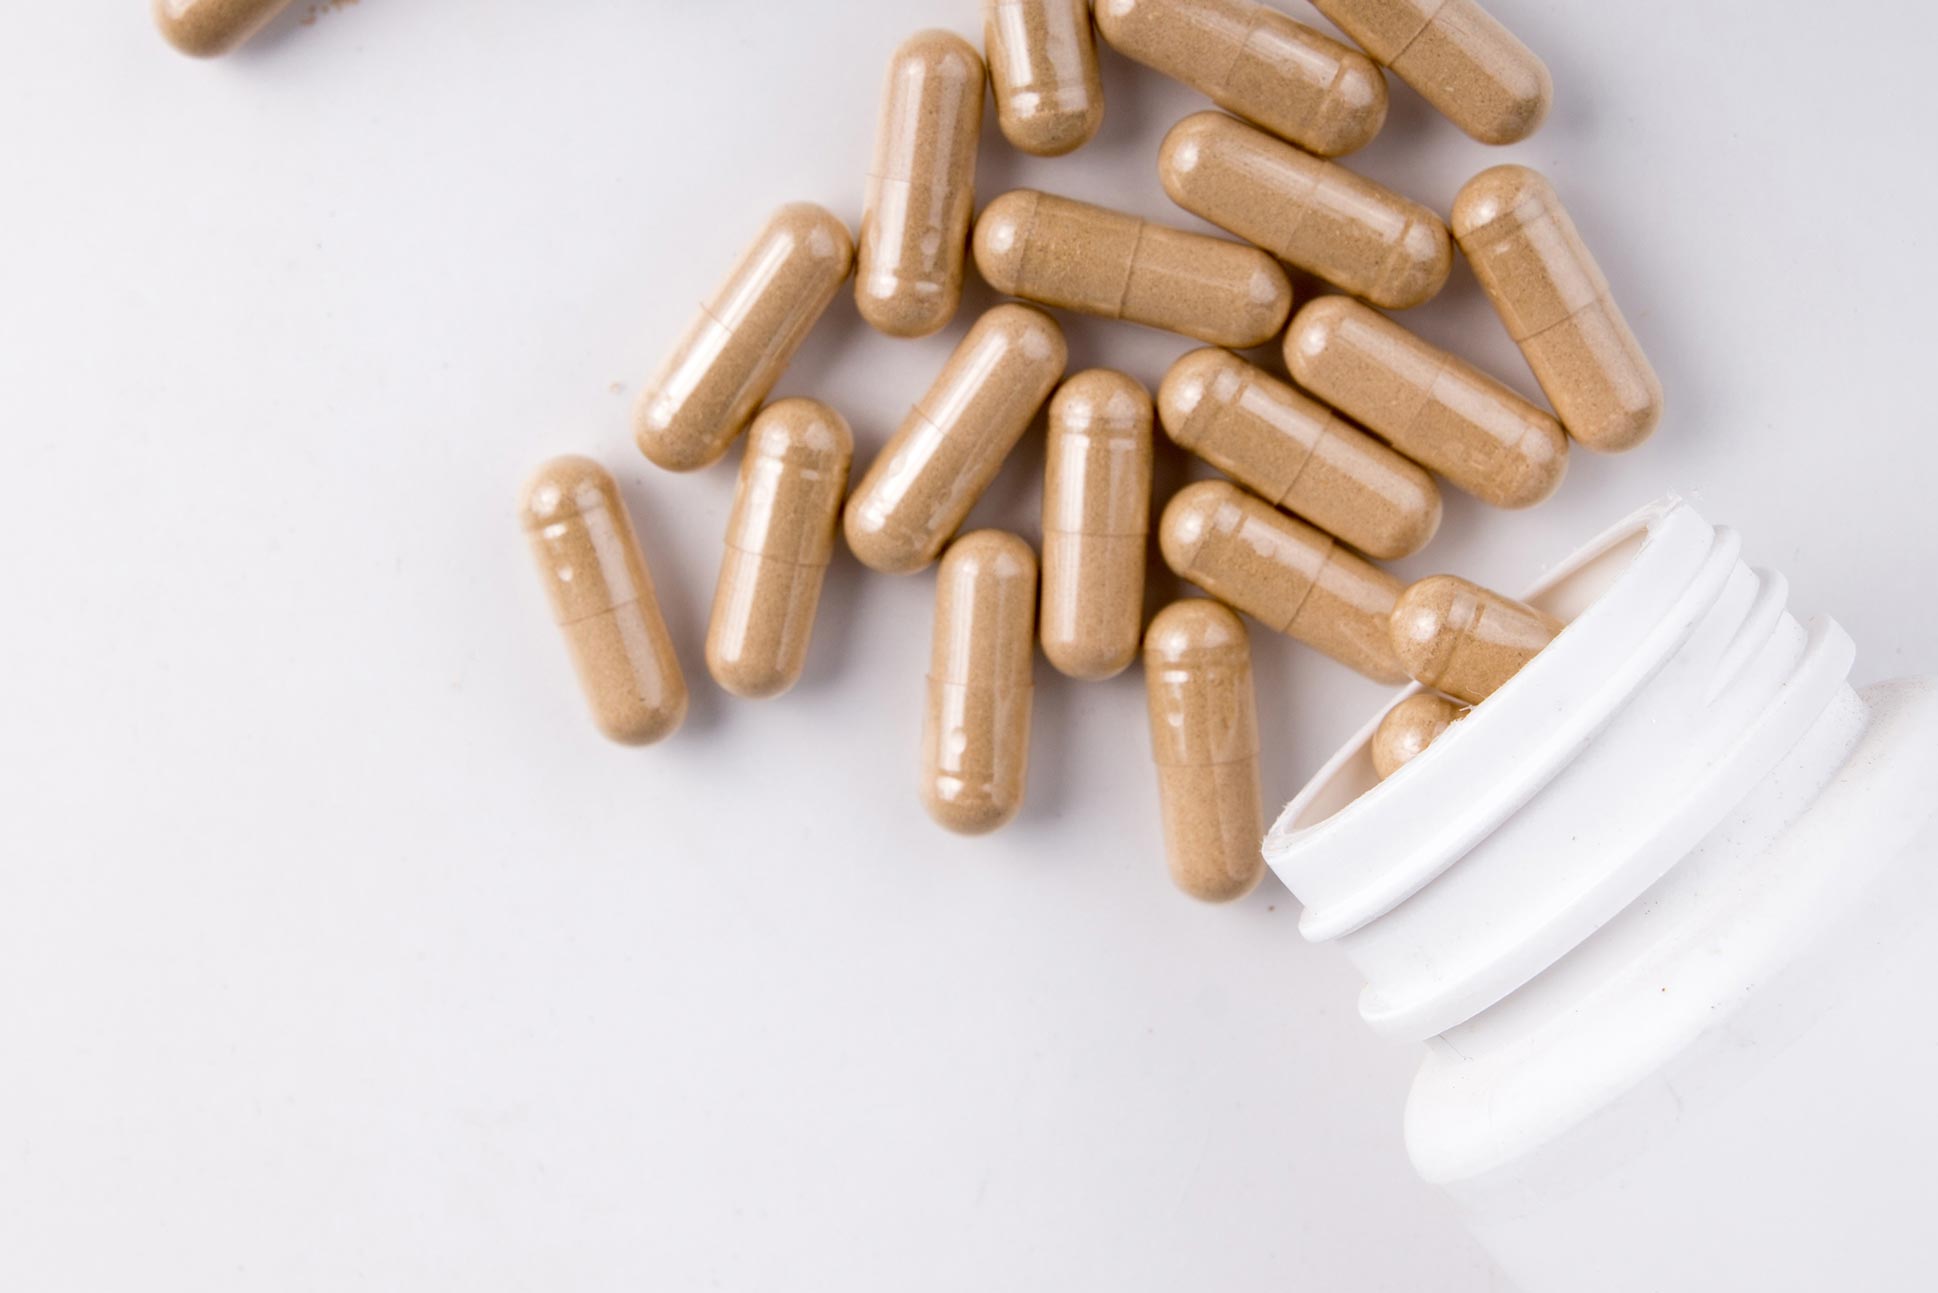 B Vitamin Supplements Probably Don’t Protect the Brain